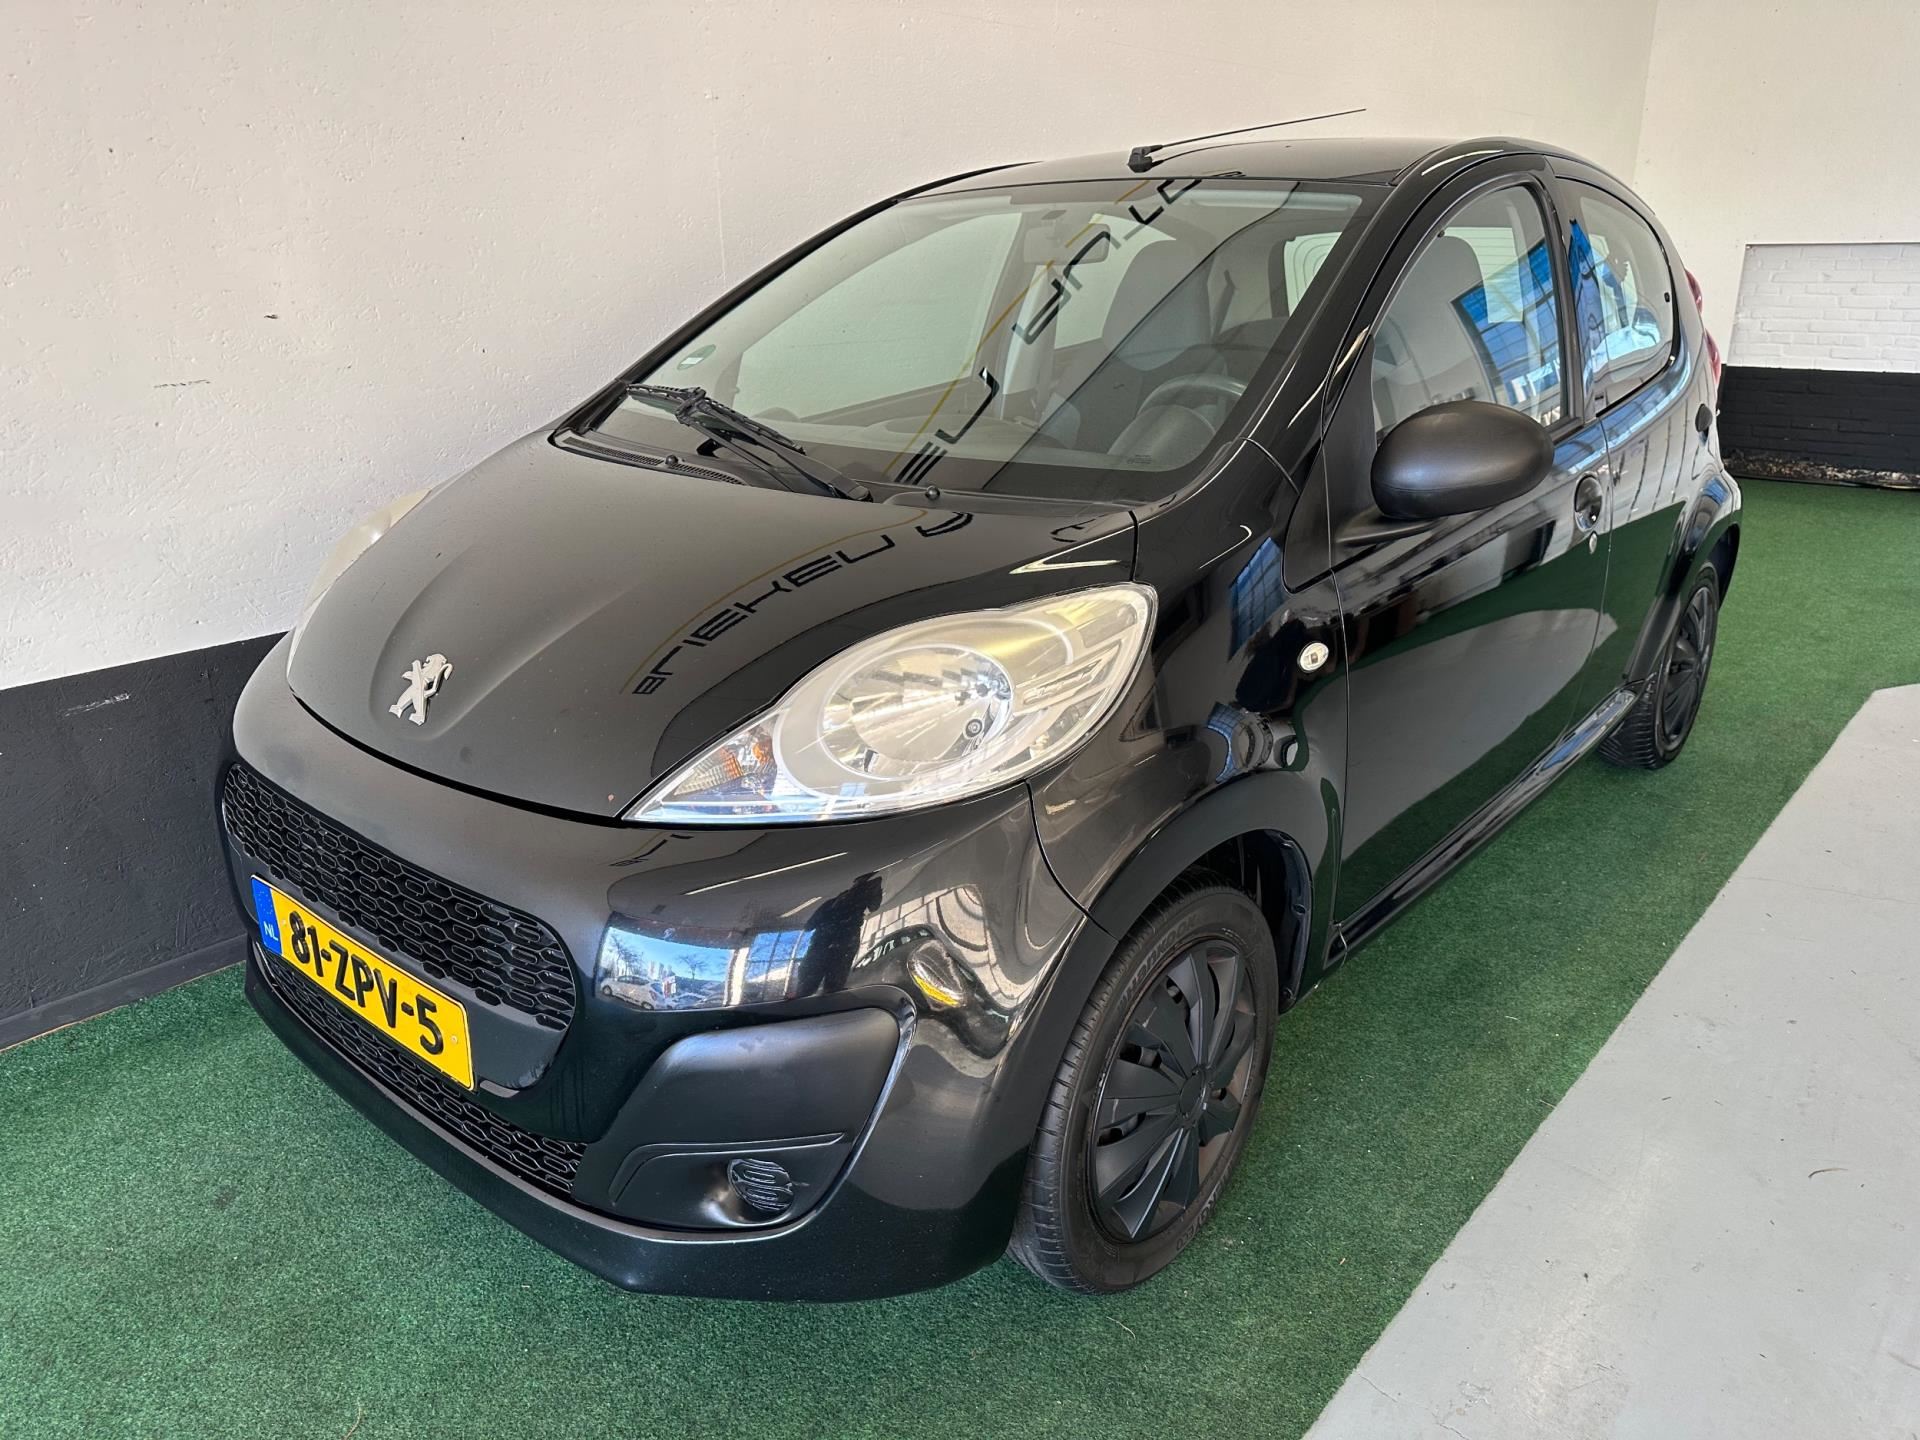 PEUGEOT 107 1-0-access-accent-facelift-airco-ap-tuning occasion - Le Parking